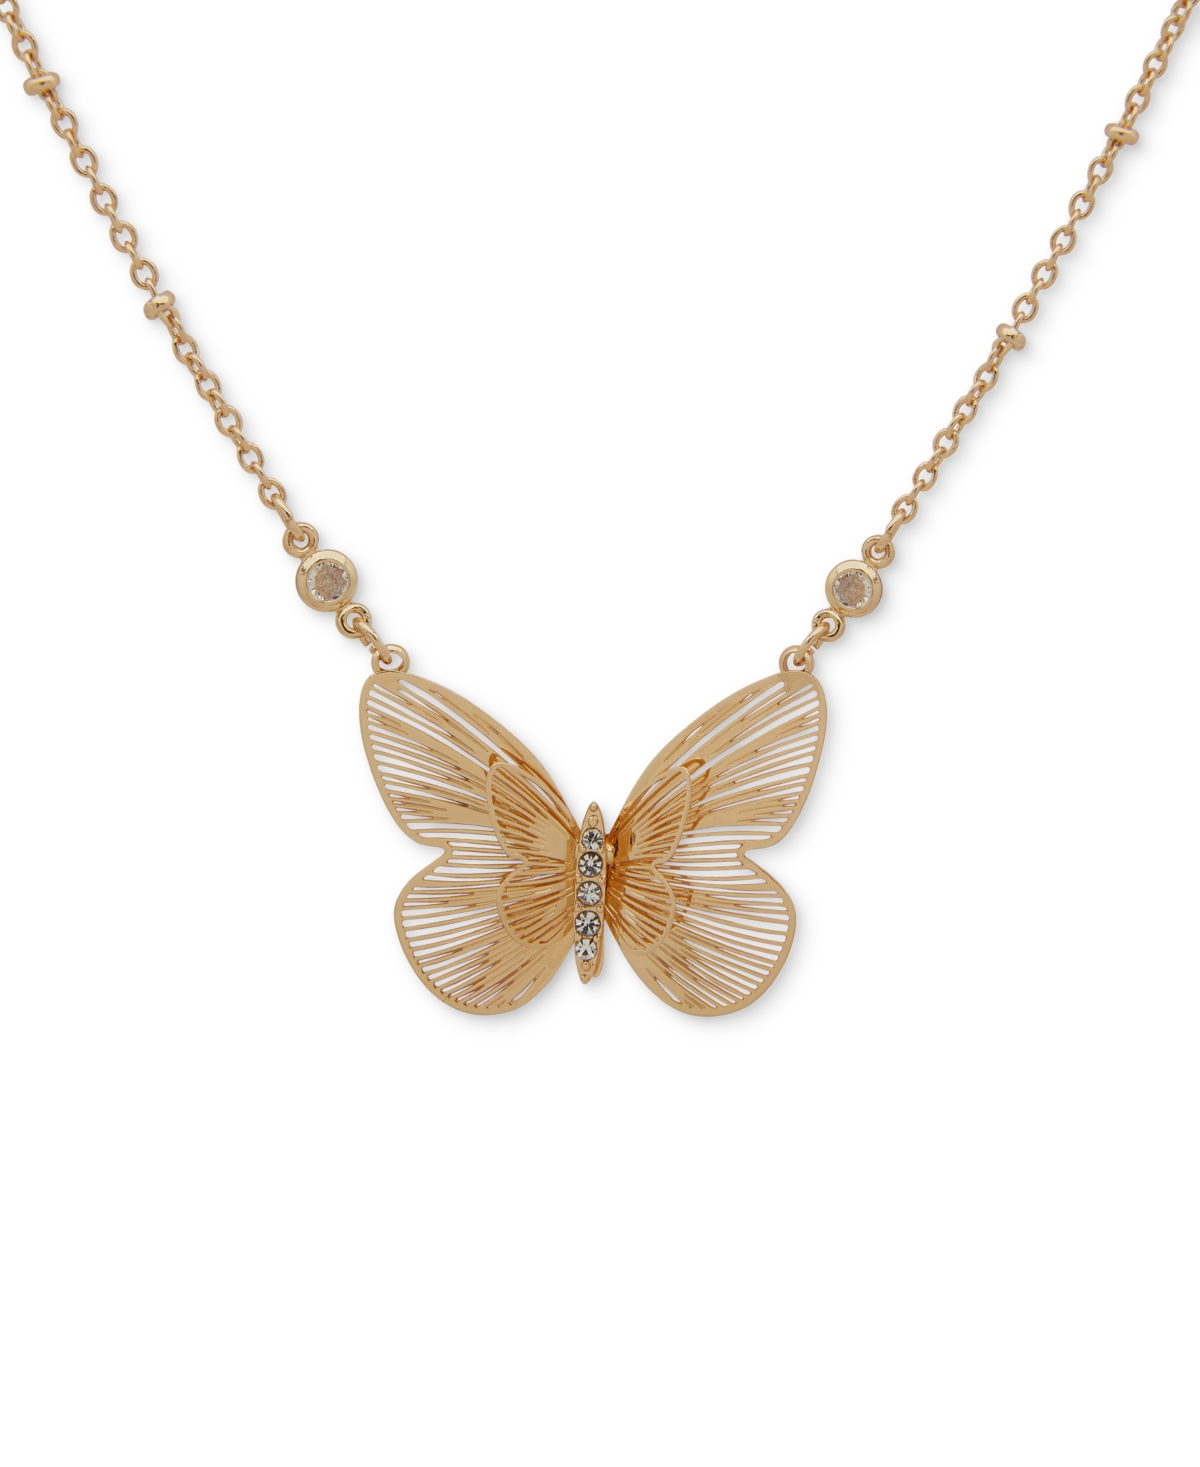 Gold-Tone Pave Butterfly Pendant Necklace, 16" + 3" extender - Crystal Wh